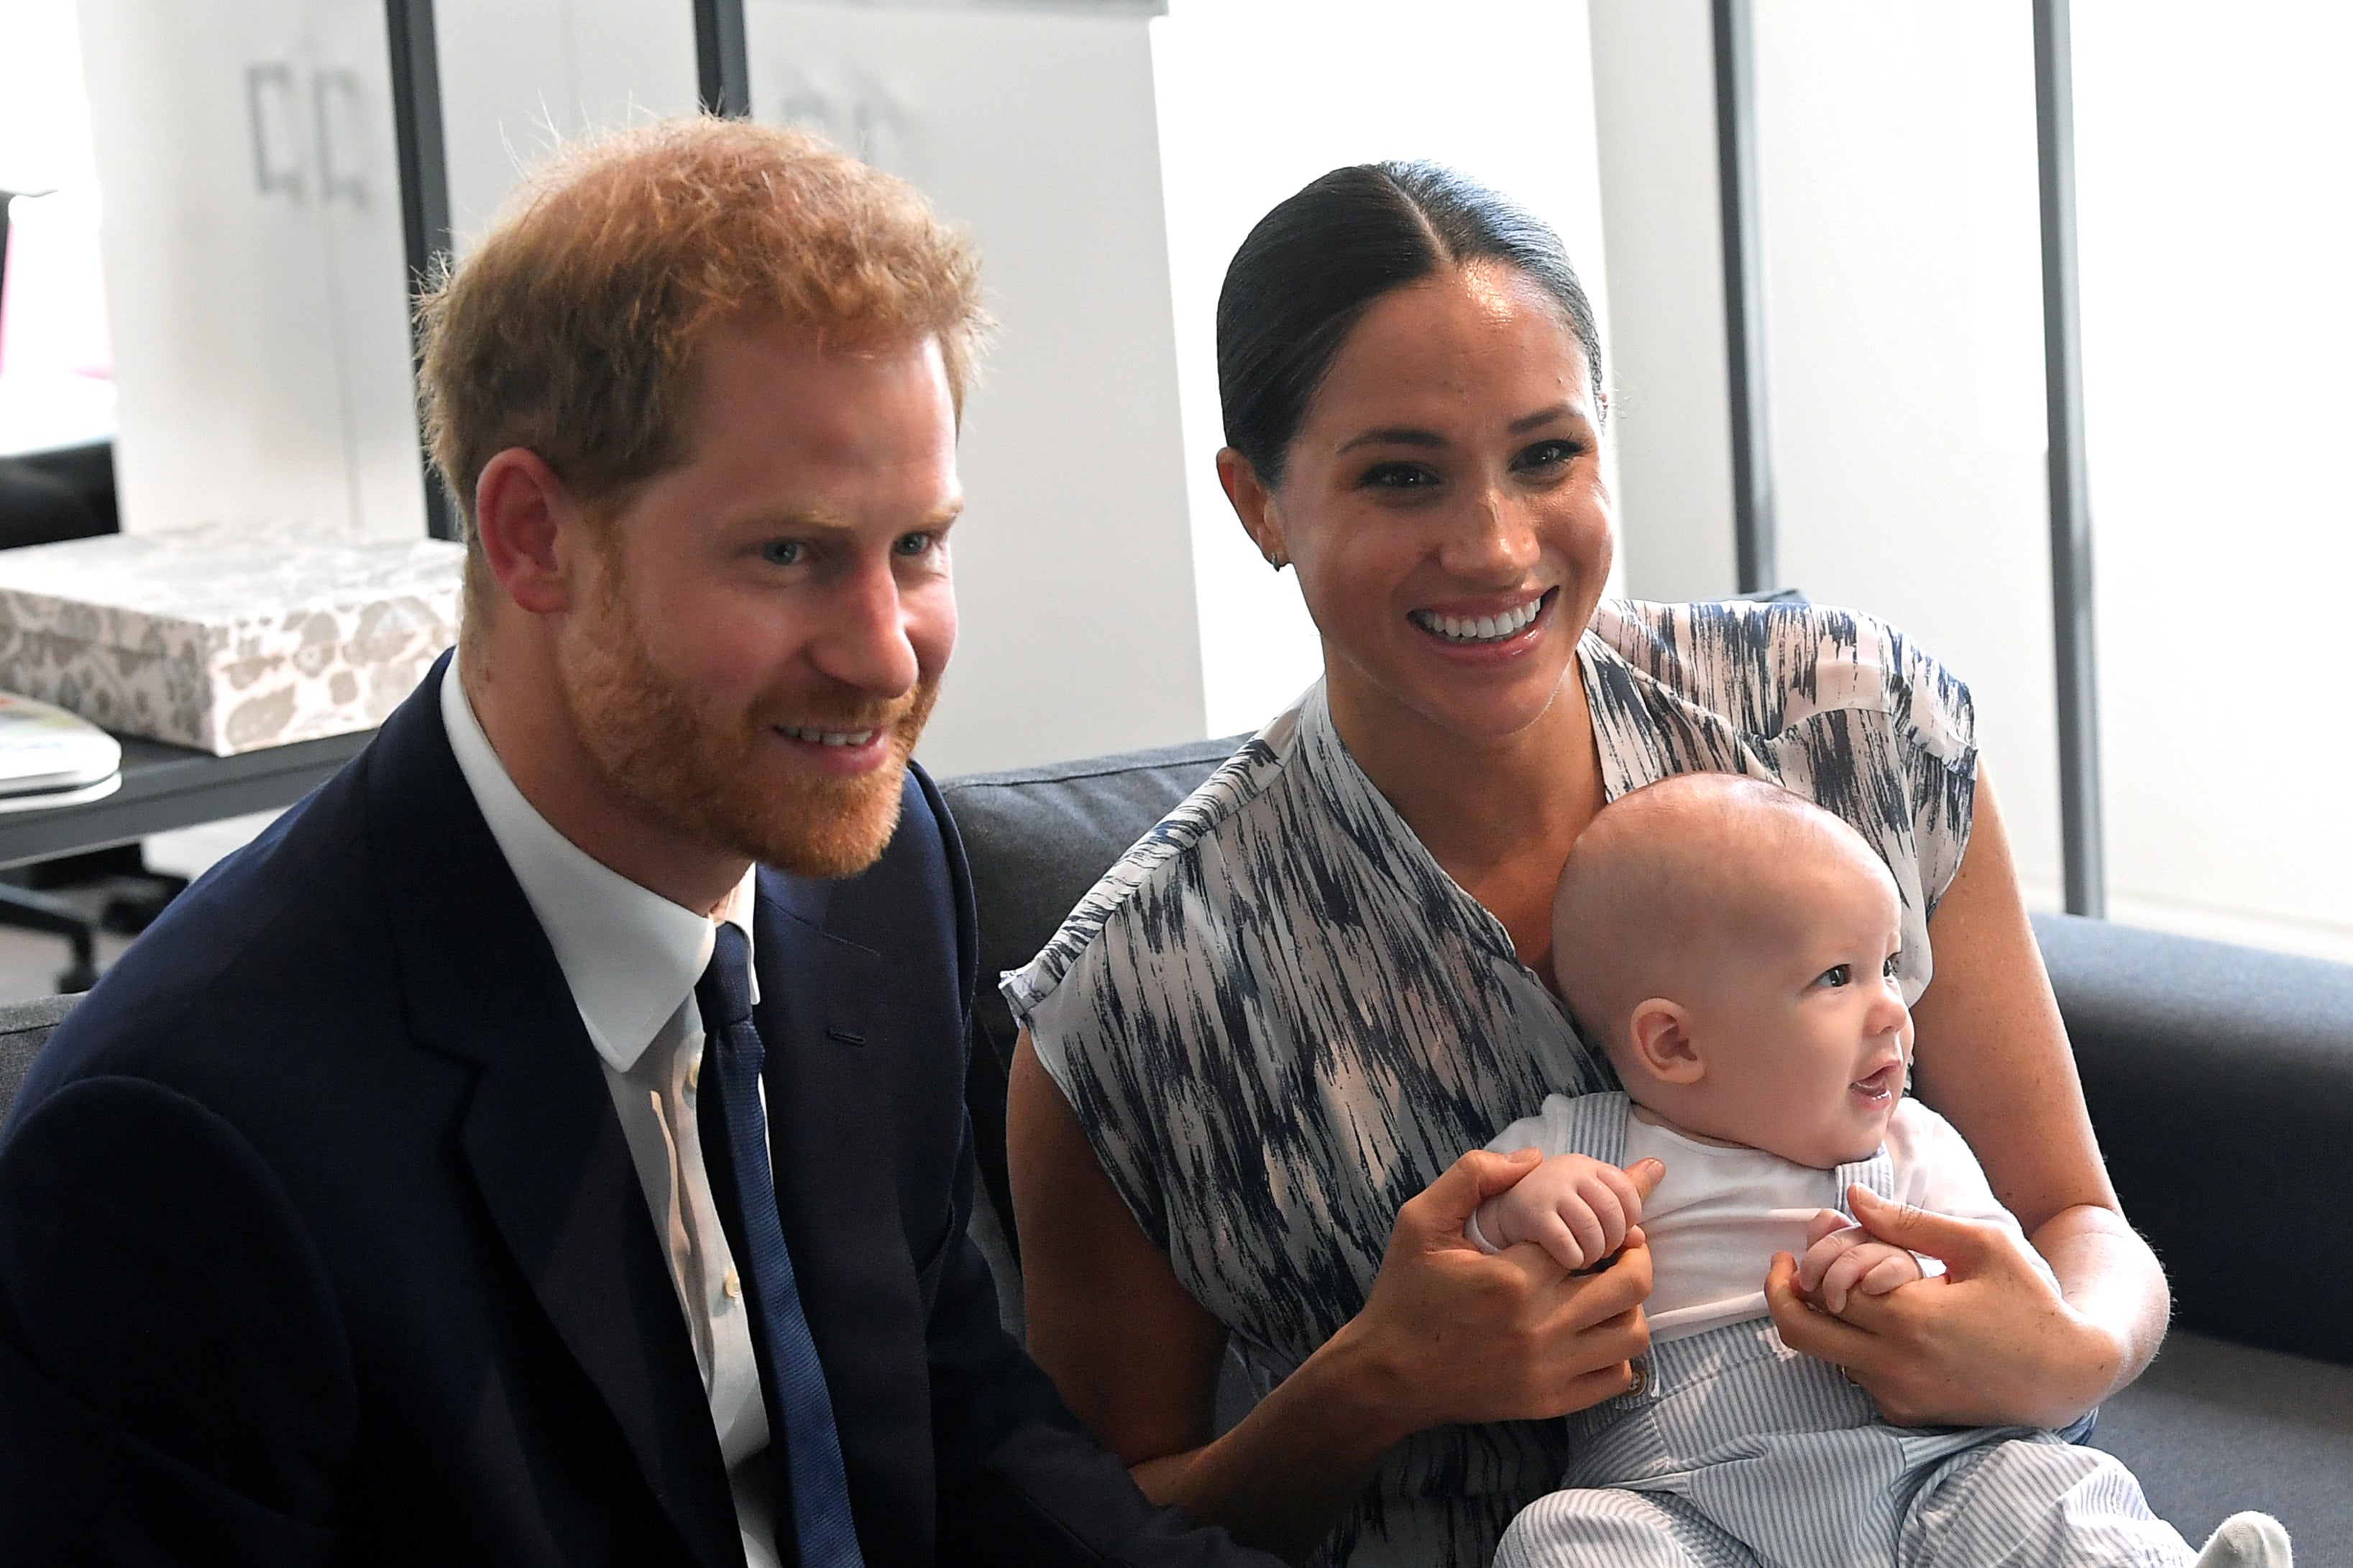 Harry, Meghan and Archie in 2019